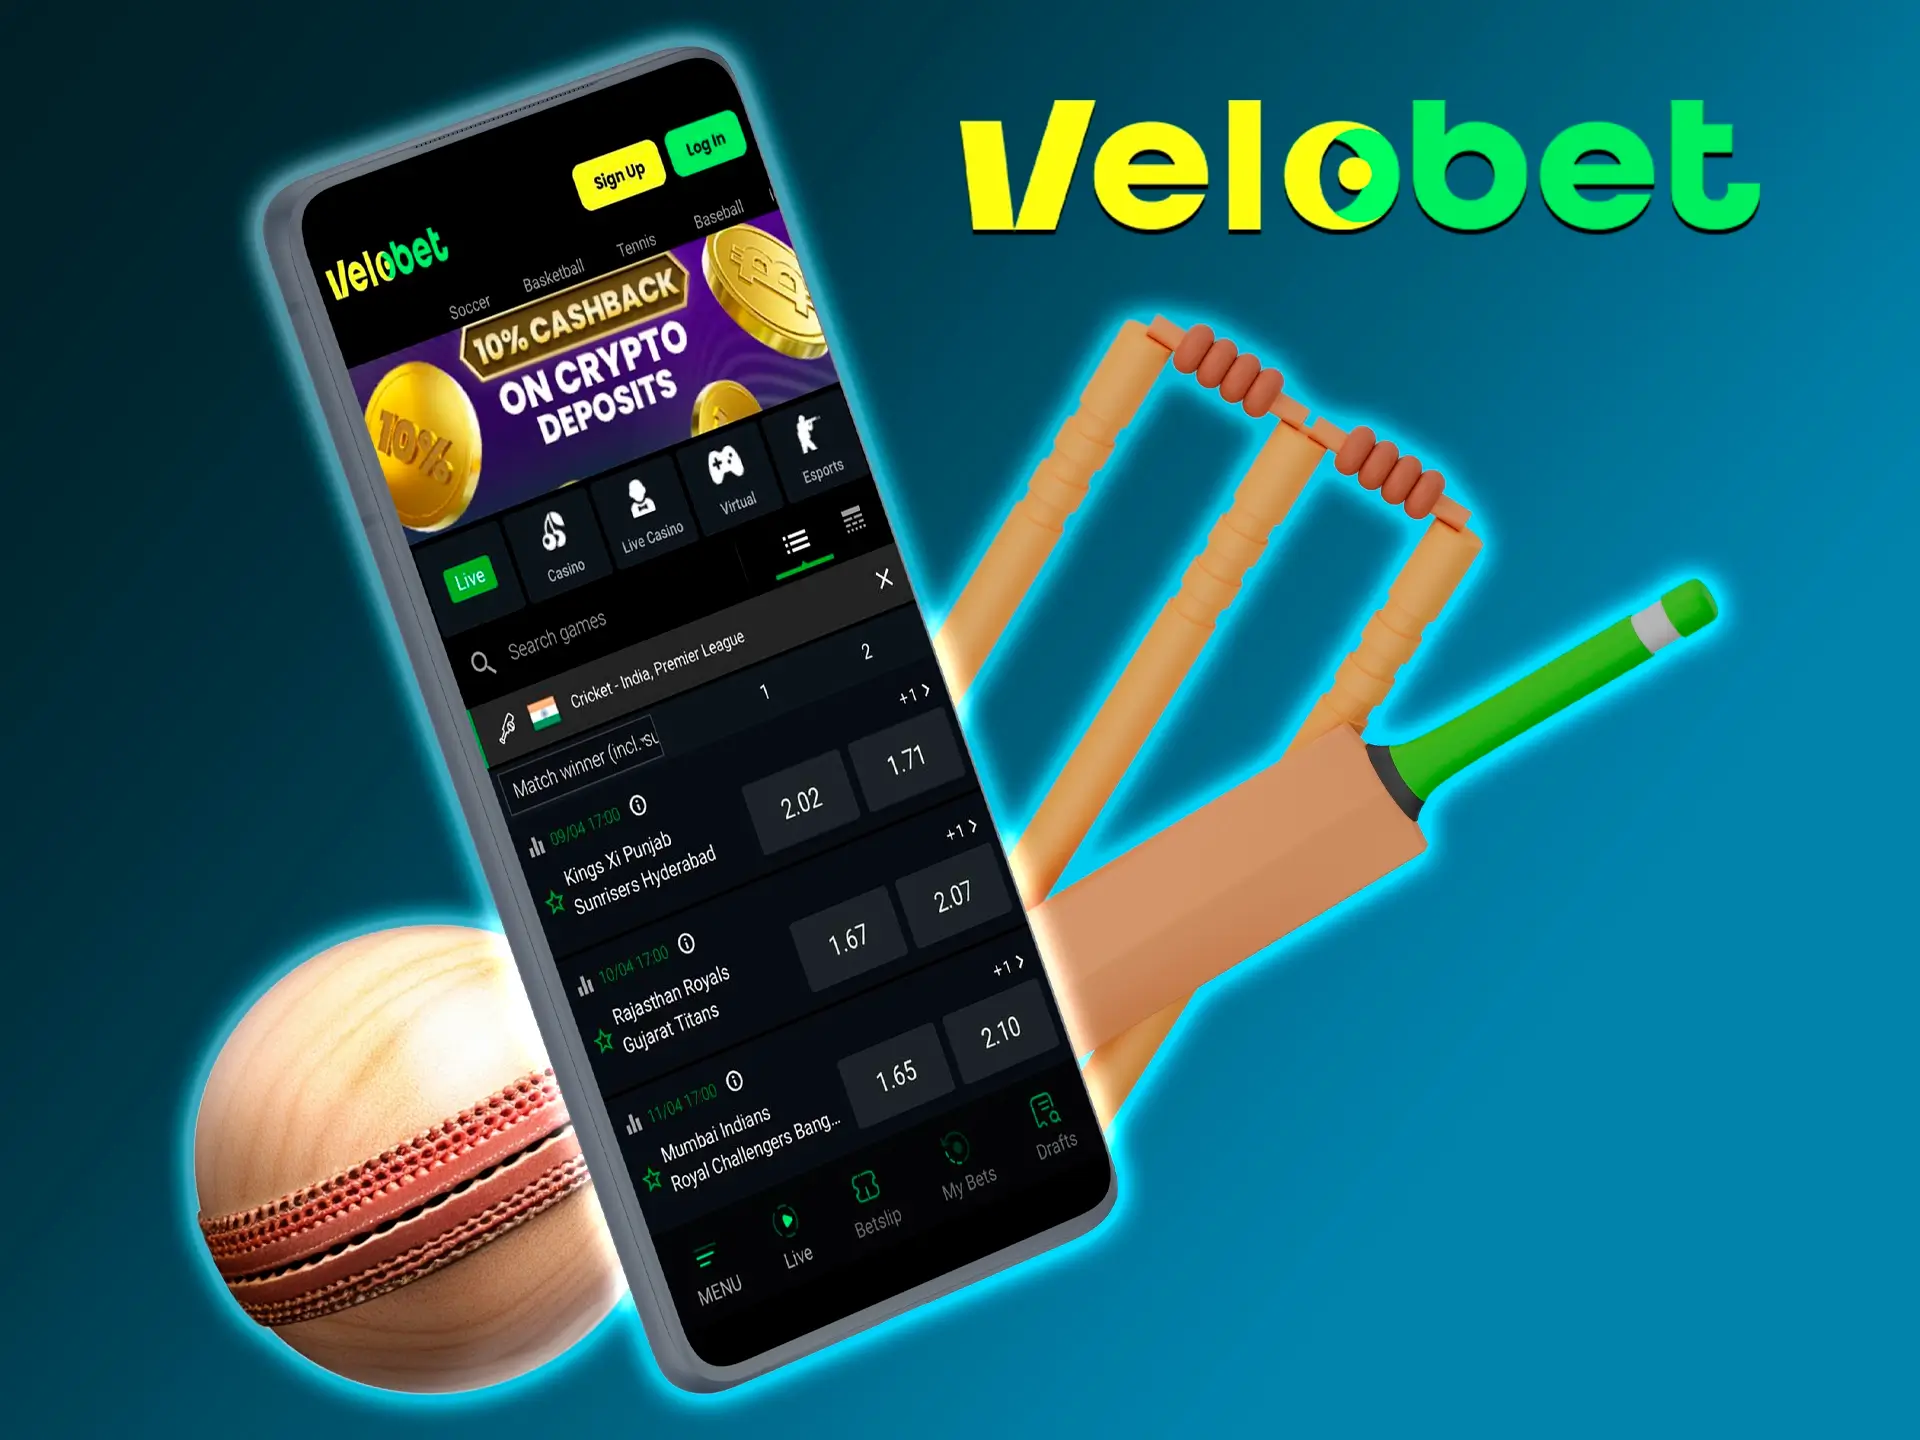 Place your bets in the Velobet app on cricket the most popular sport in Bangladesh.